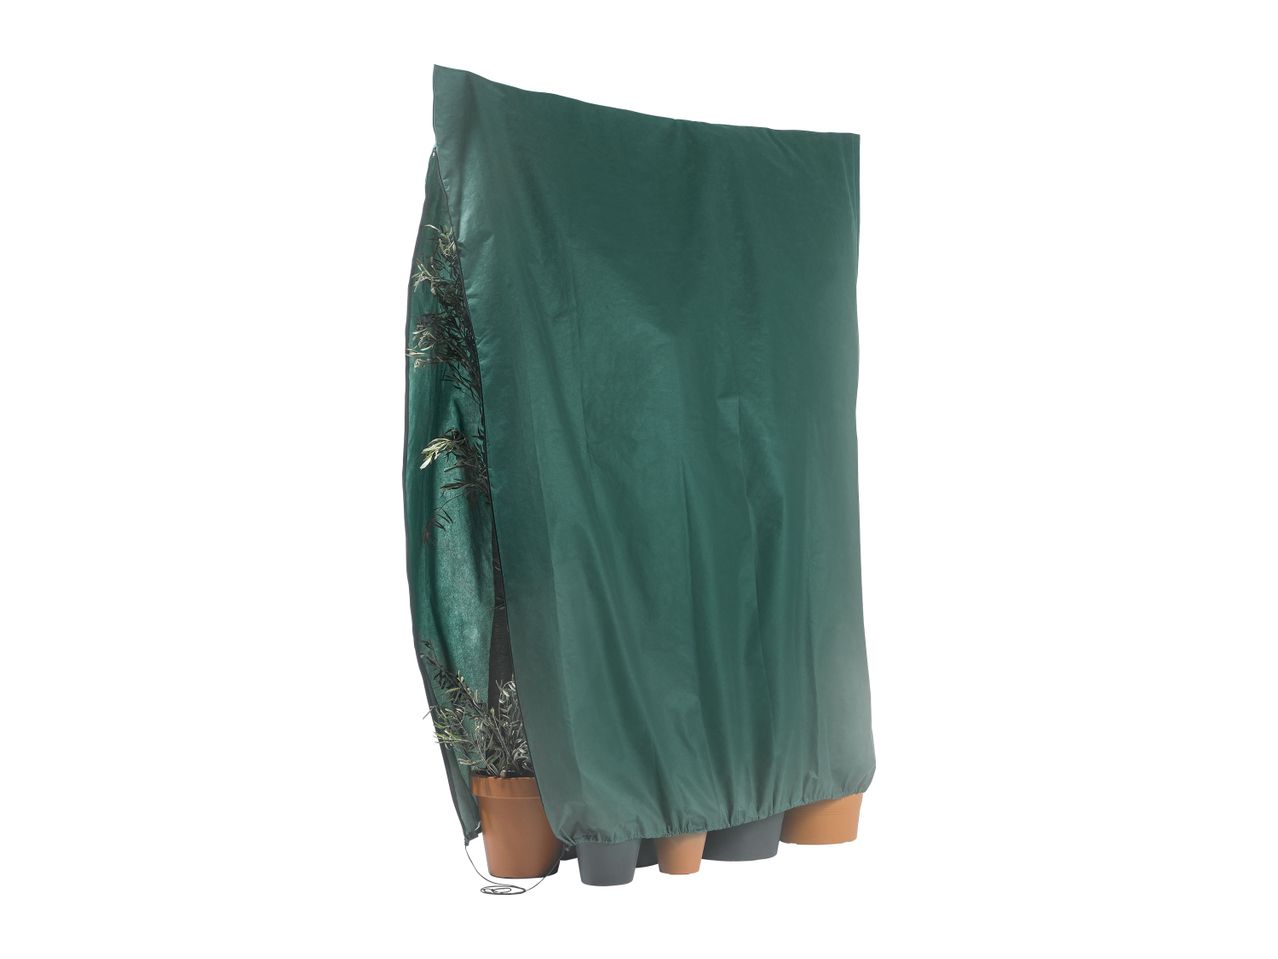 Go to full screen view: PARKSIDE Plant Protection Fleece Jacket - Image 9